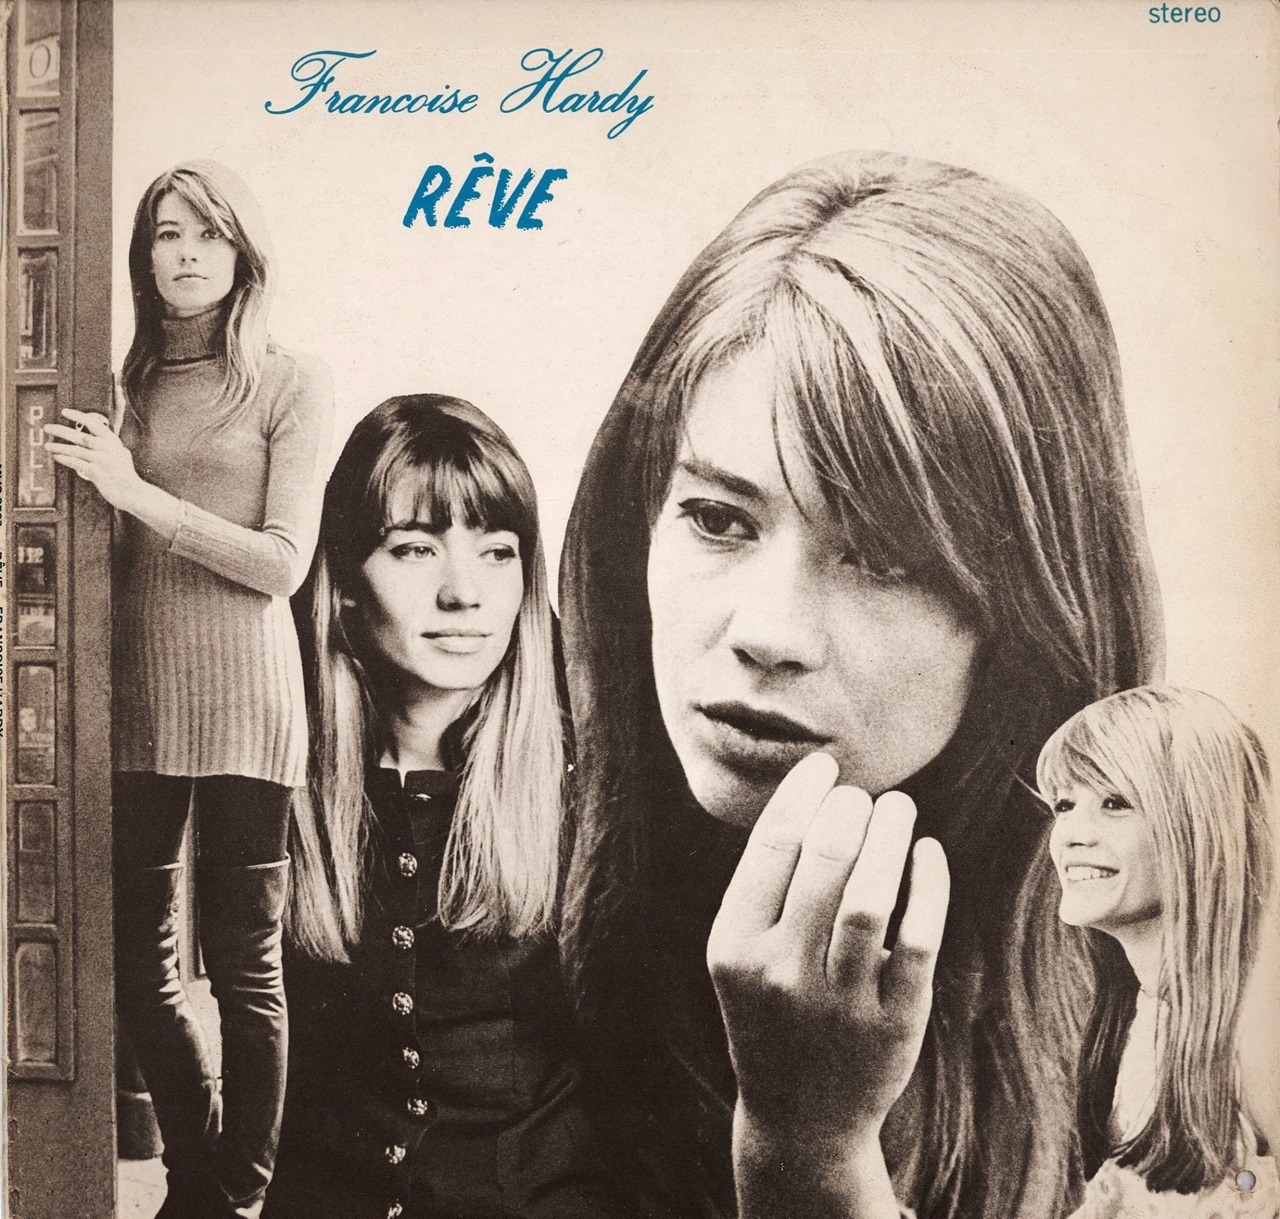 isabelcostasixties: Françoise Hardy, Rêve (La Question), LP, South Africa (very